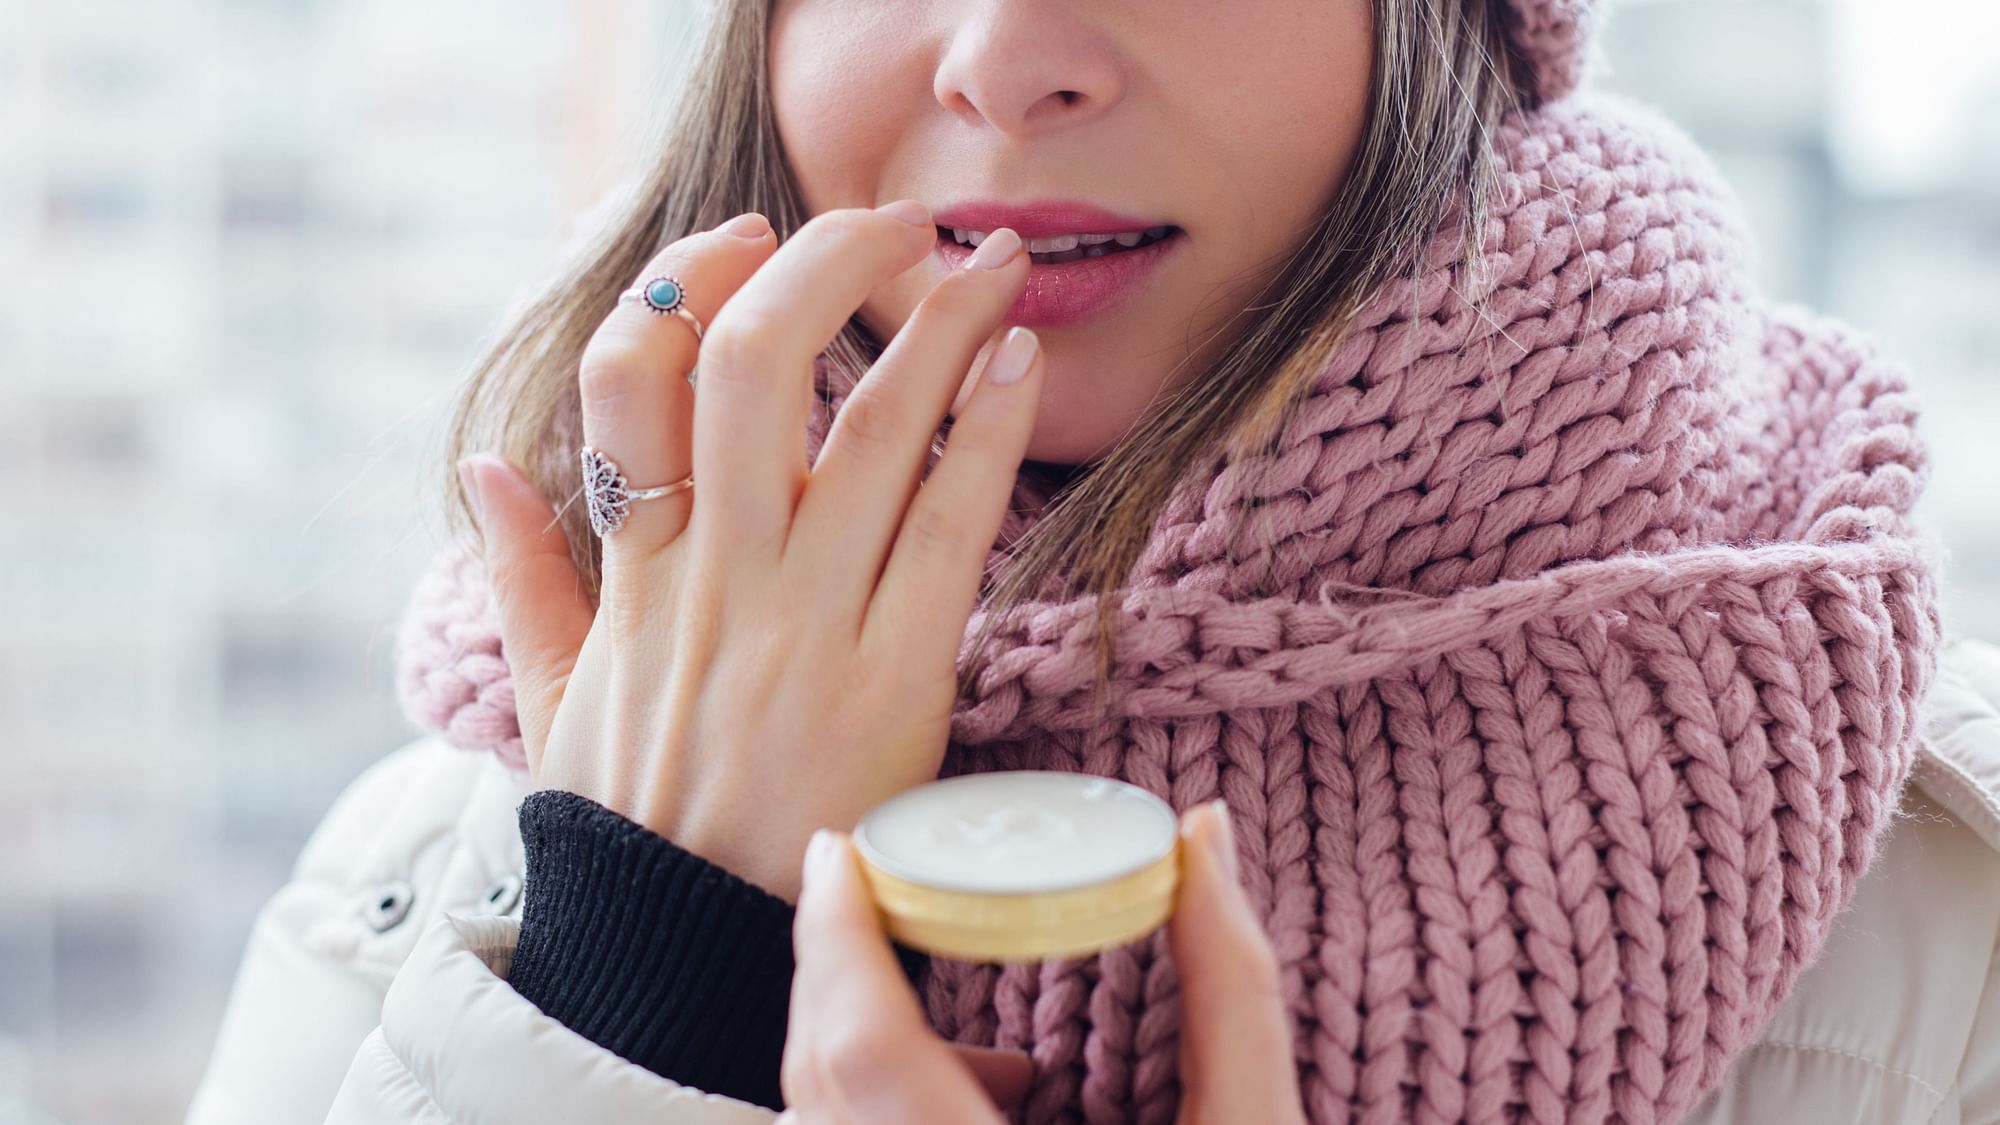 Take this quiz to know how the perfect diet and skincare can help you beat all those winter blues.